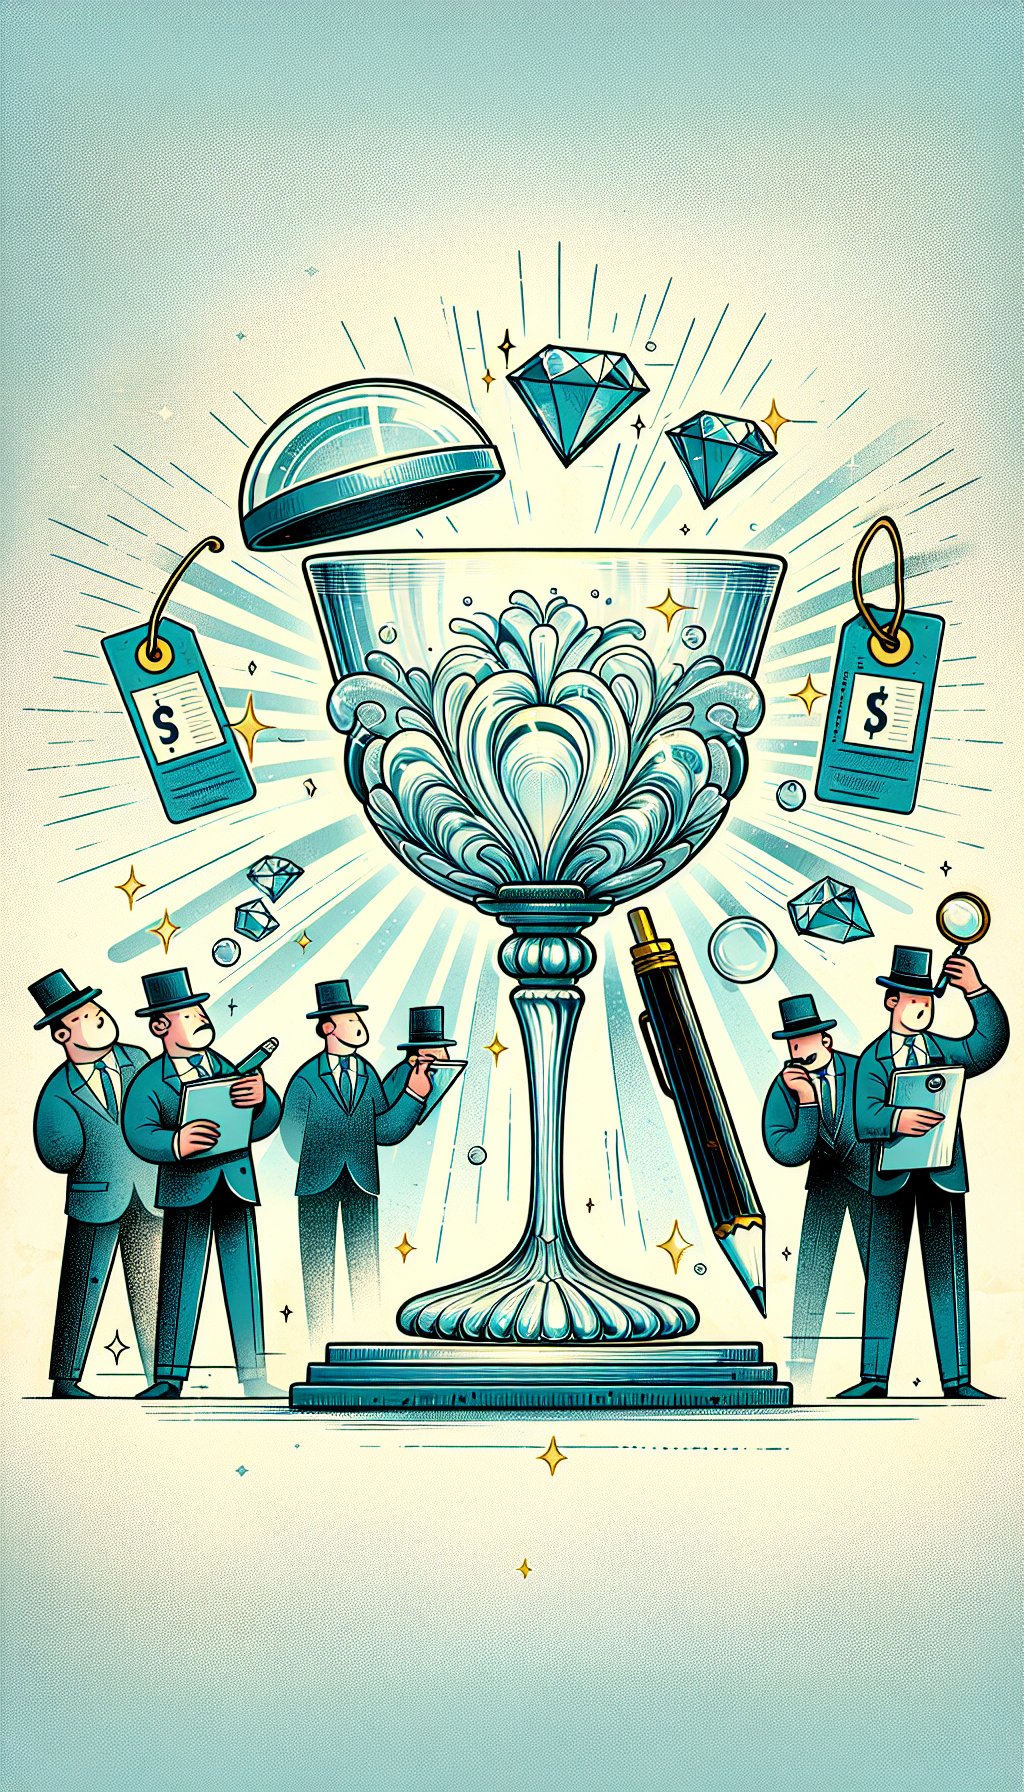 A whimsical illustration depicts an antique crystal wine glass on a pedestal, magnifying glass hovering above it, with glistening light rays revealing hidden patterns. Price tags with increasing sums float upward, alongside expert characters in hats denoting their knowledge, pencil and checklist in hand, assessing the glass's worth, subtly implying the escalating value of the treasured antique.